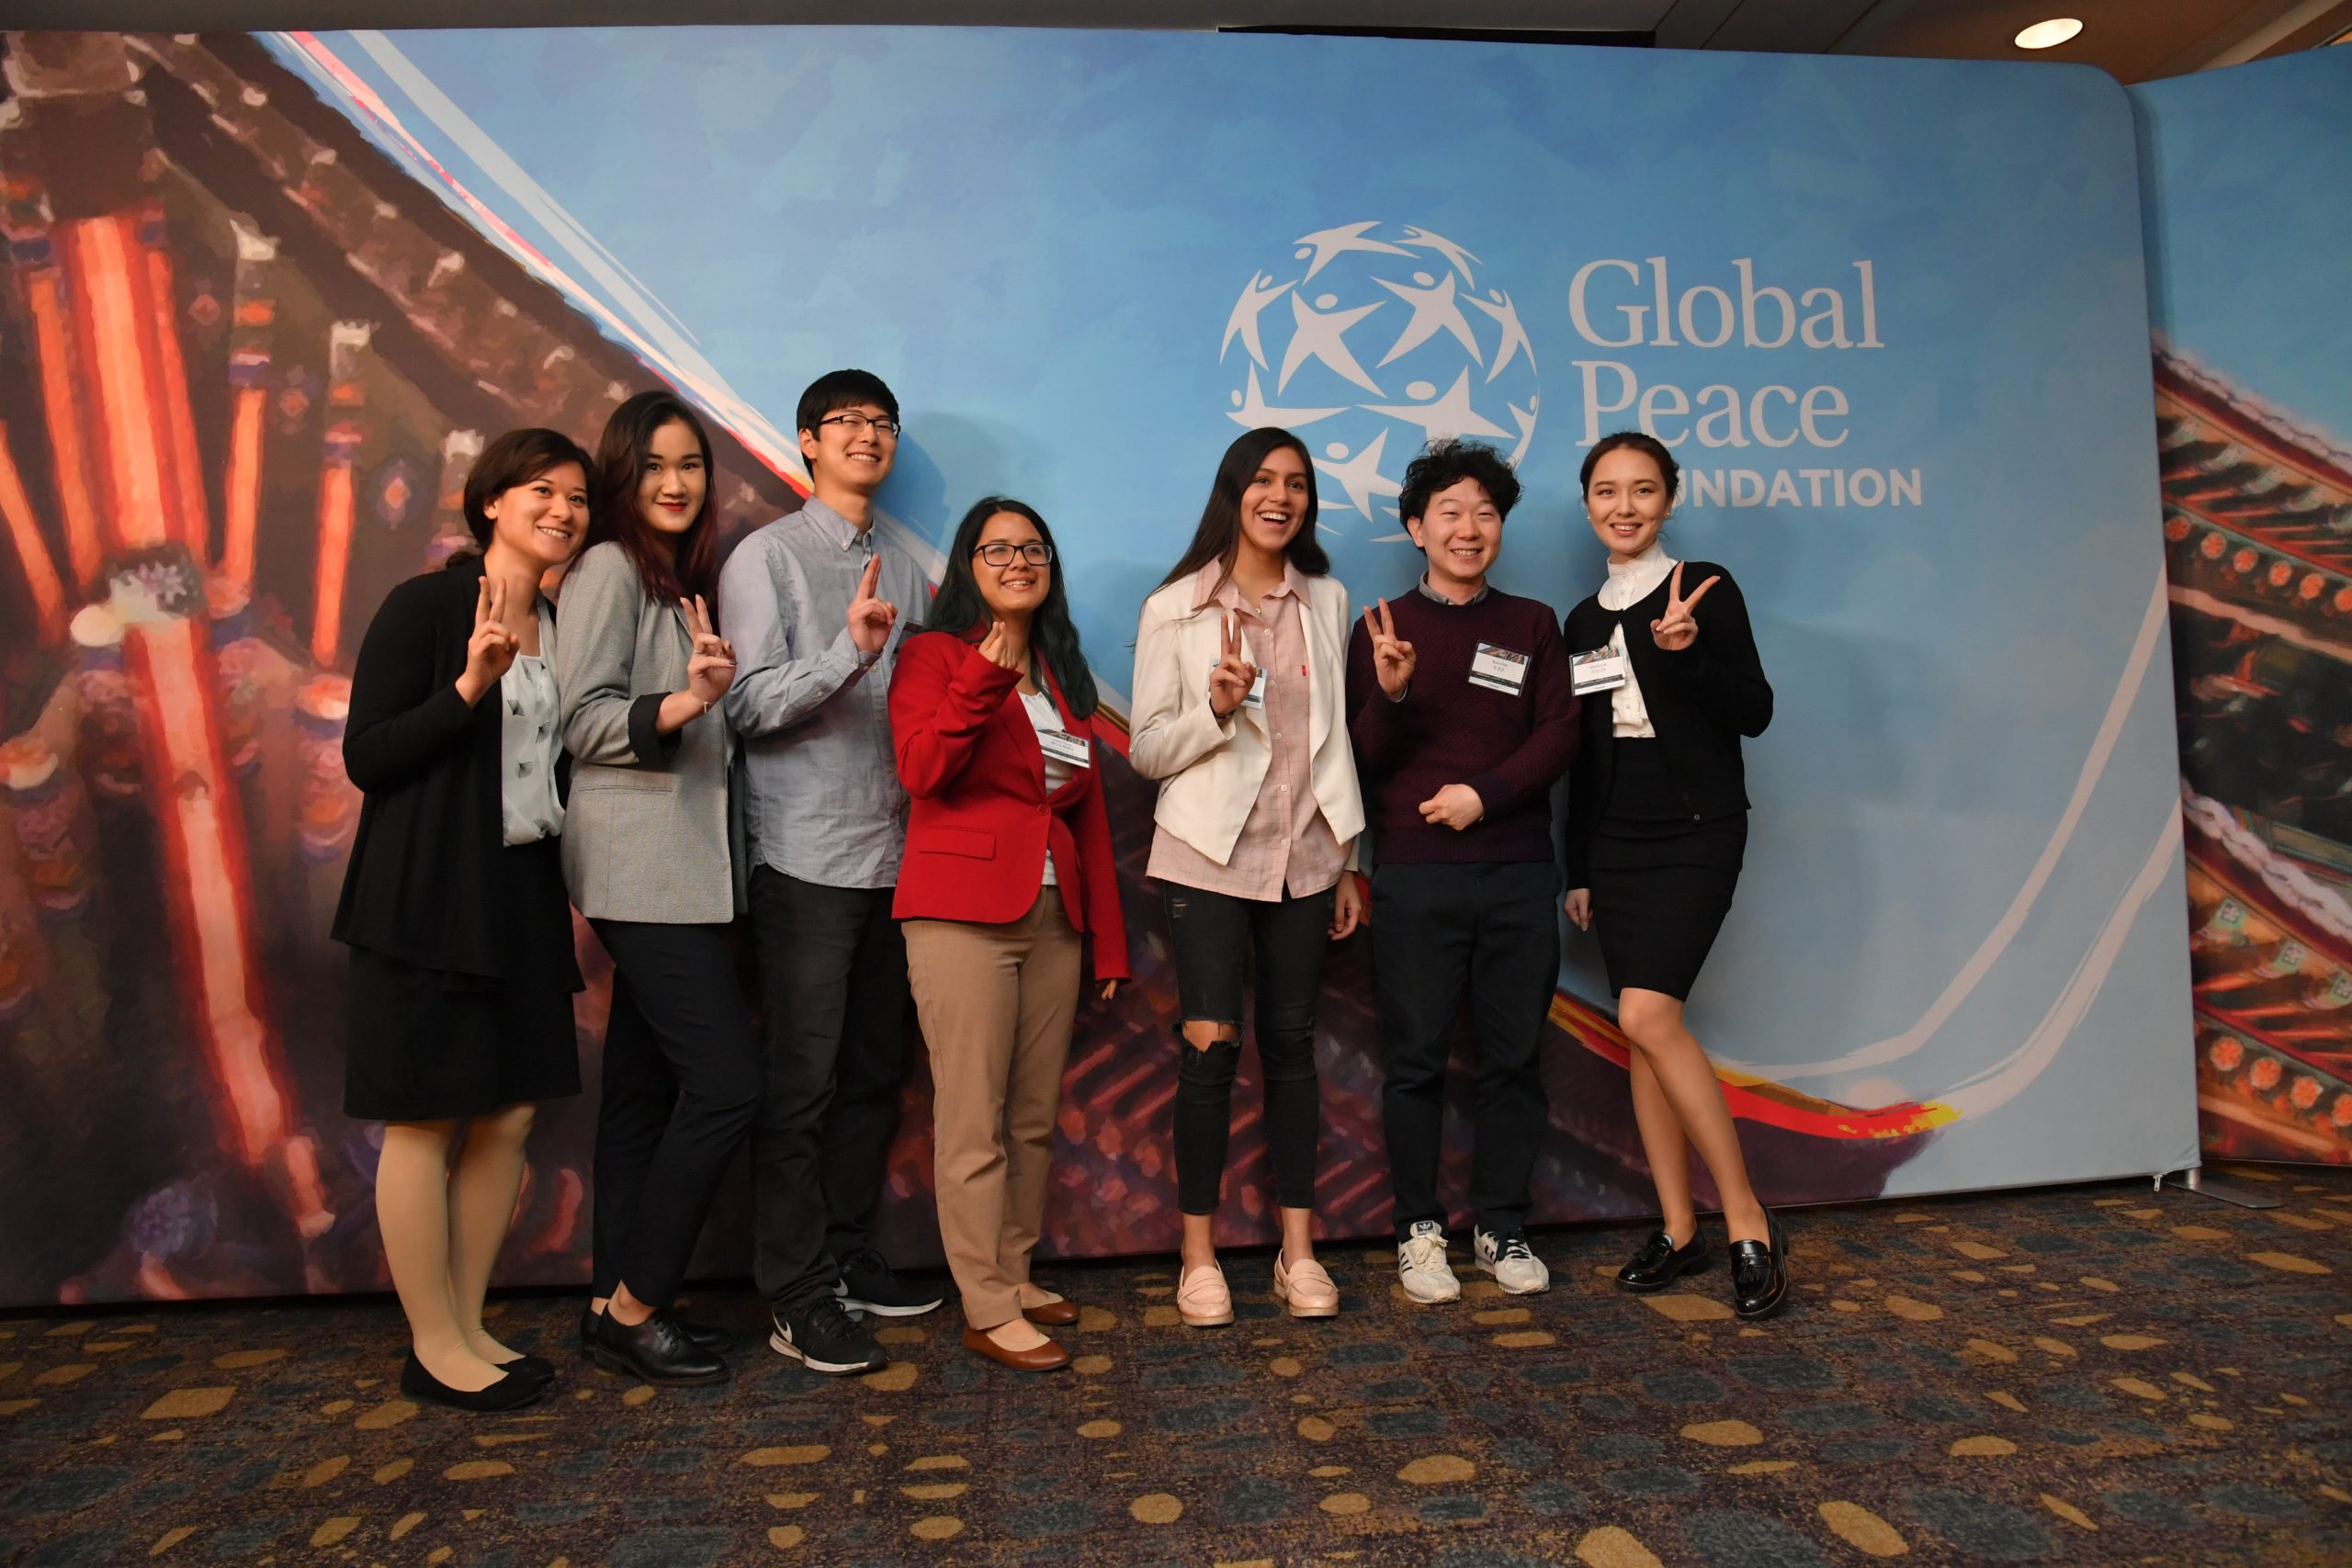 Global Peace Foundation | Vision for a United Korea at the 2019 Global Peace Convention: Perspective from the United States